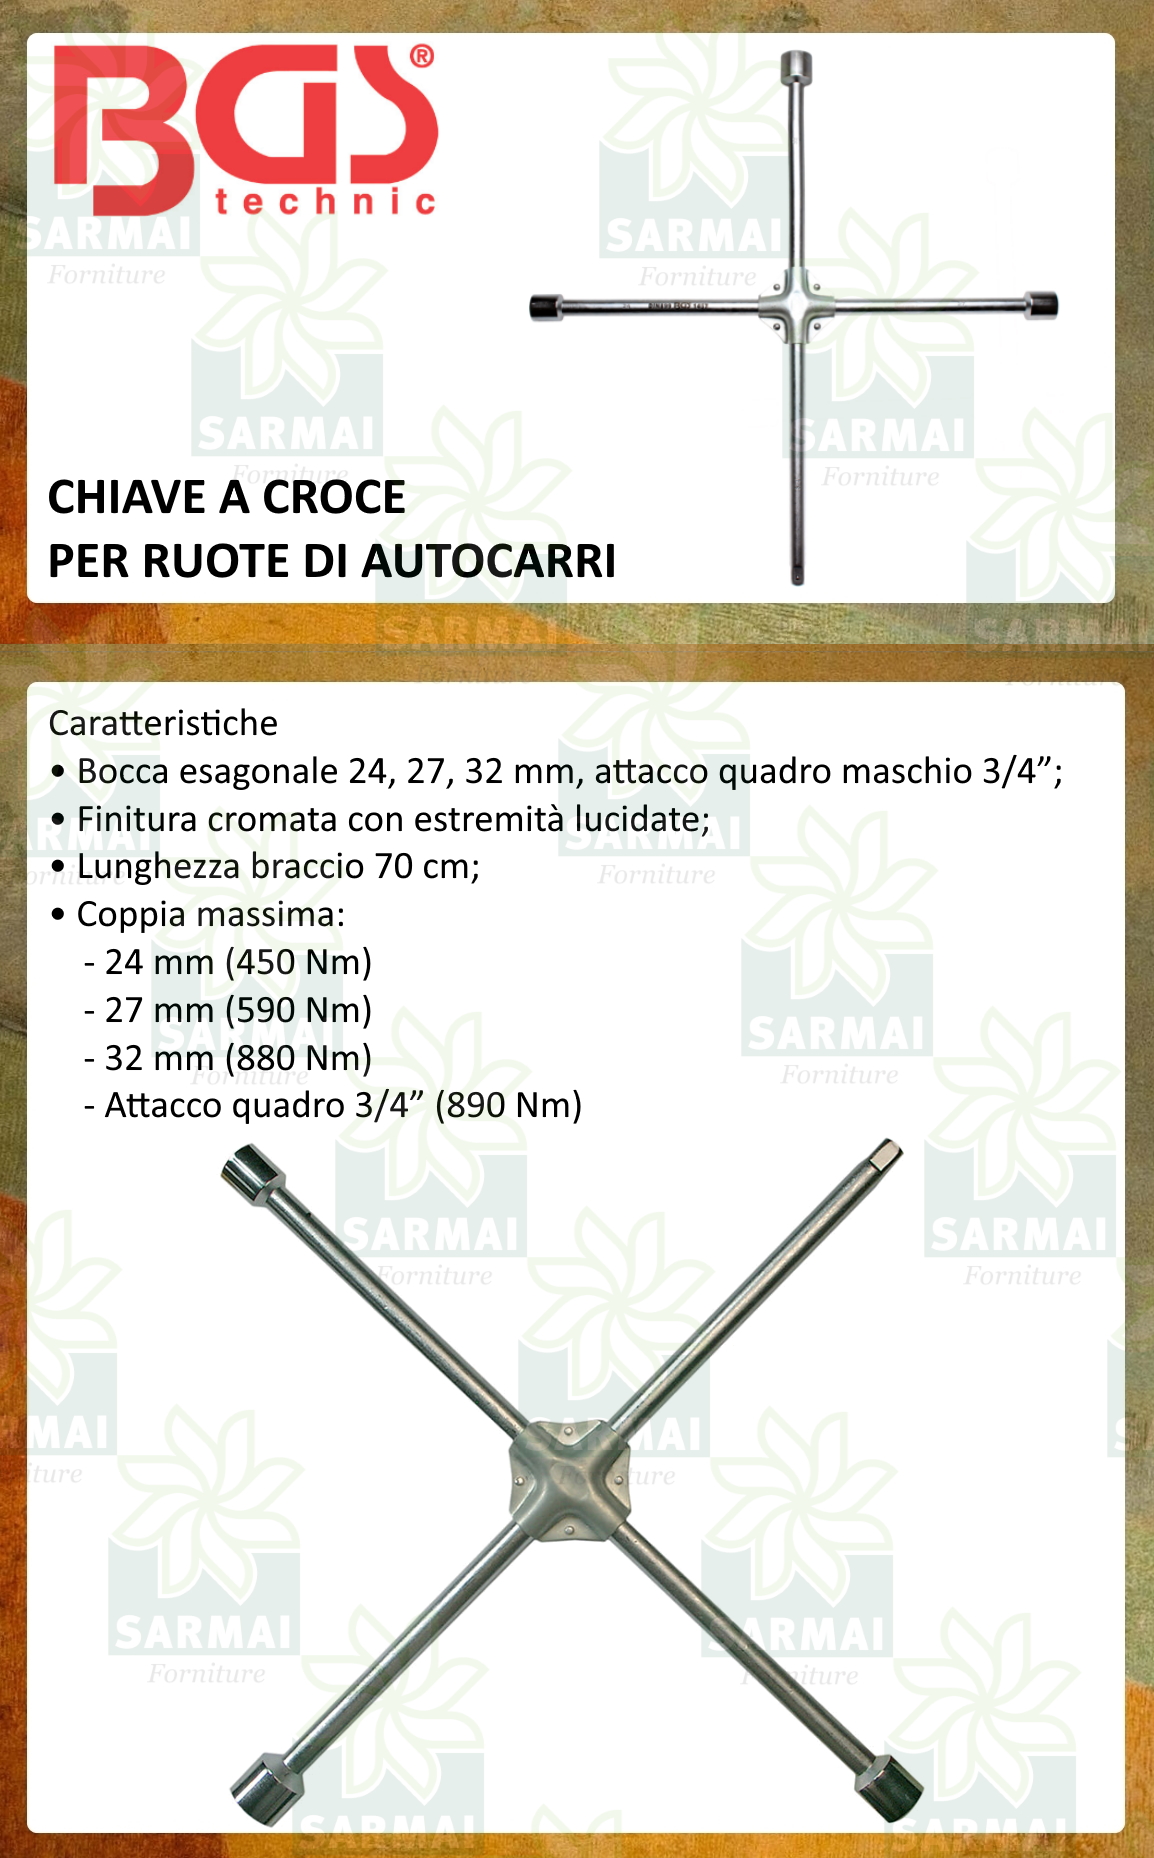 BGS 1457 chiave a croce per dadi ruote camion bussole 24/27/32 mm attacco 3/